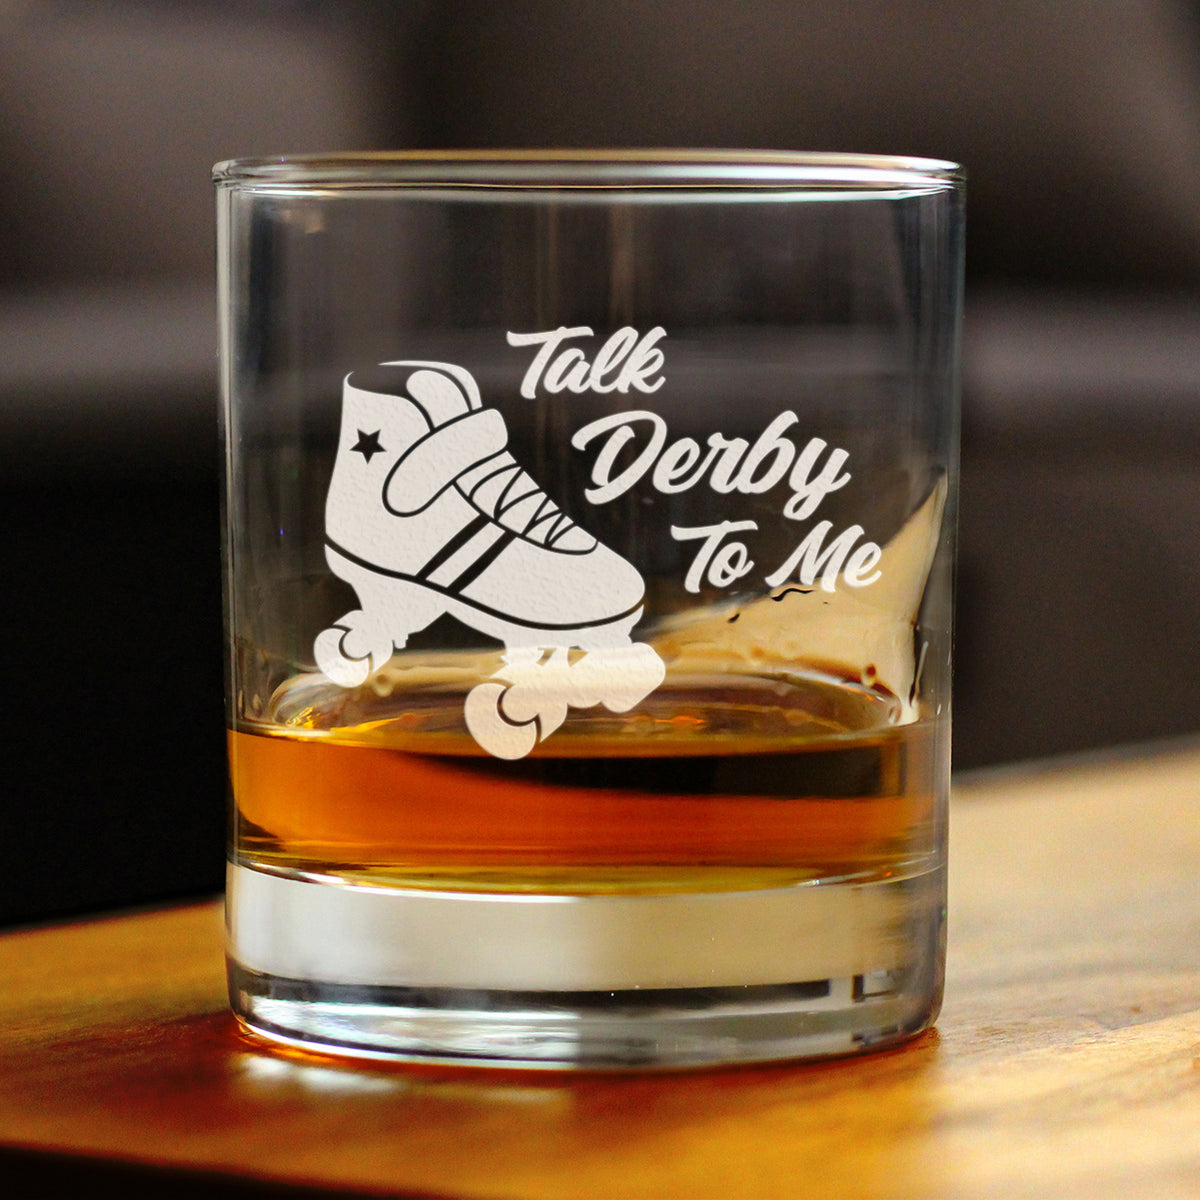 Talk Derby To Me - Whiskey Rocks Glass Gifts - Funny Rollerblading Gifts and Decor for Men &amp; Women - 10.25 Oz Glasses